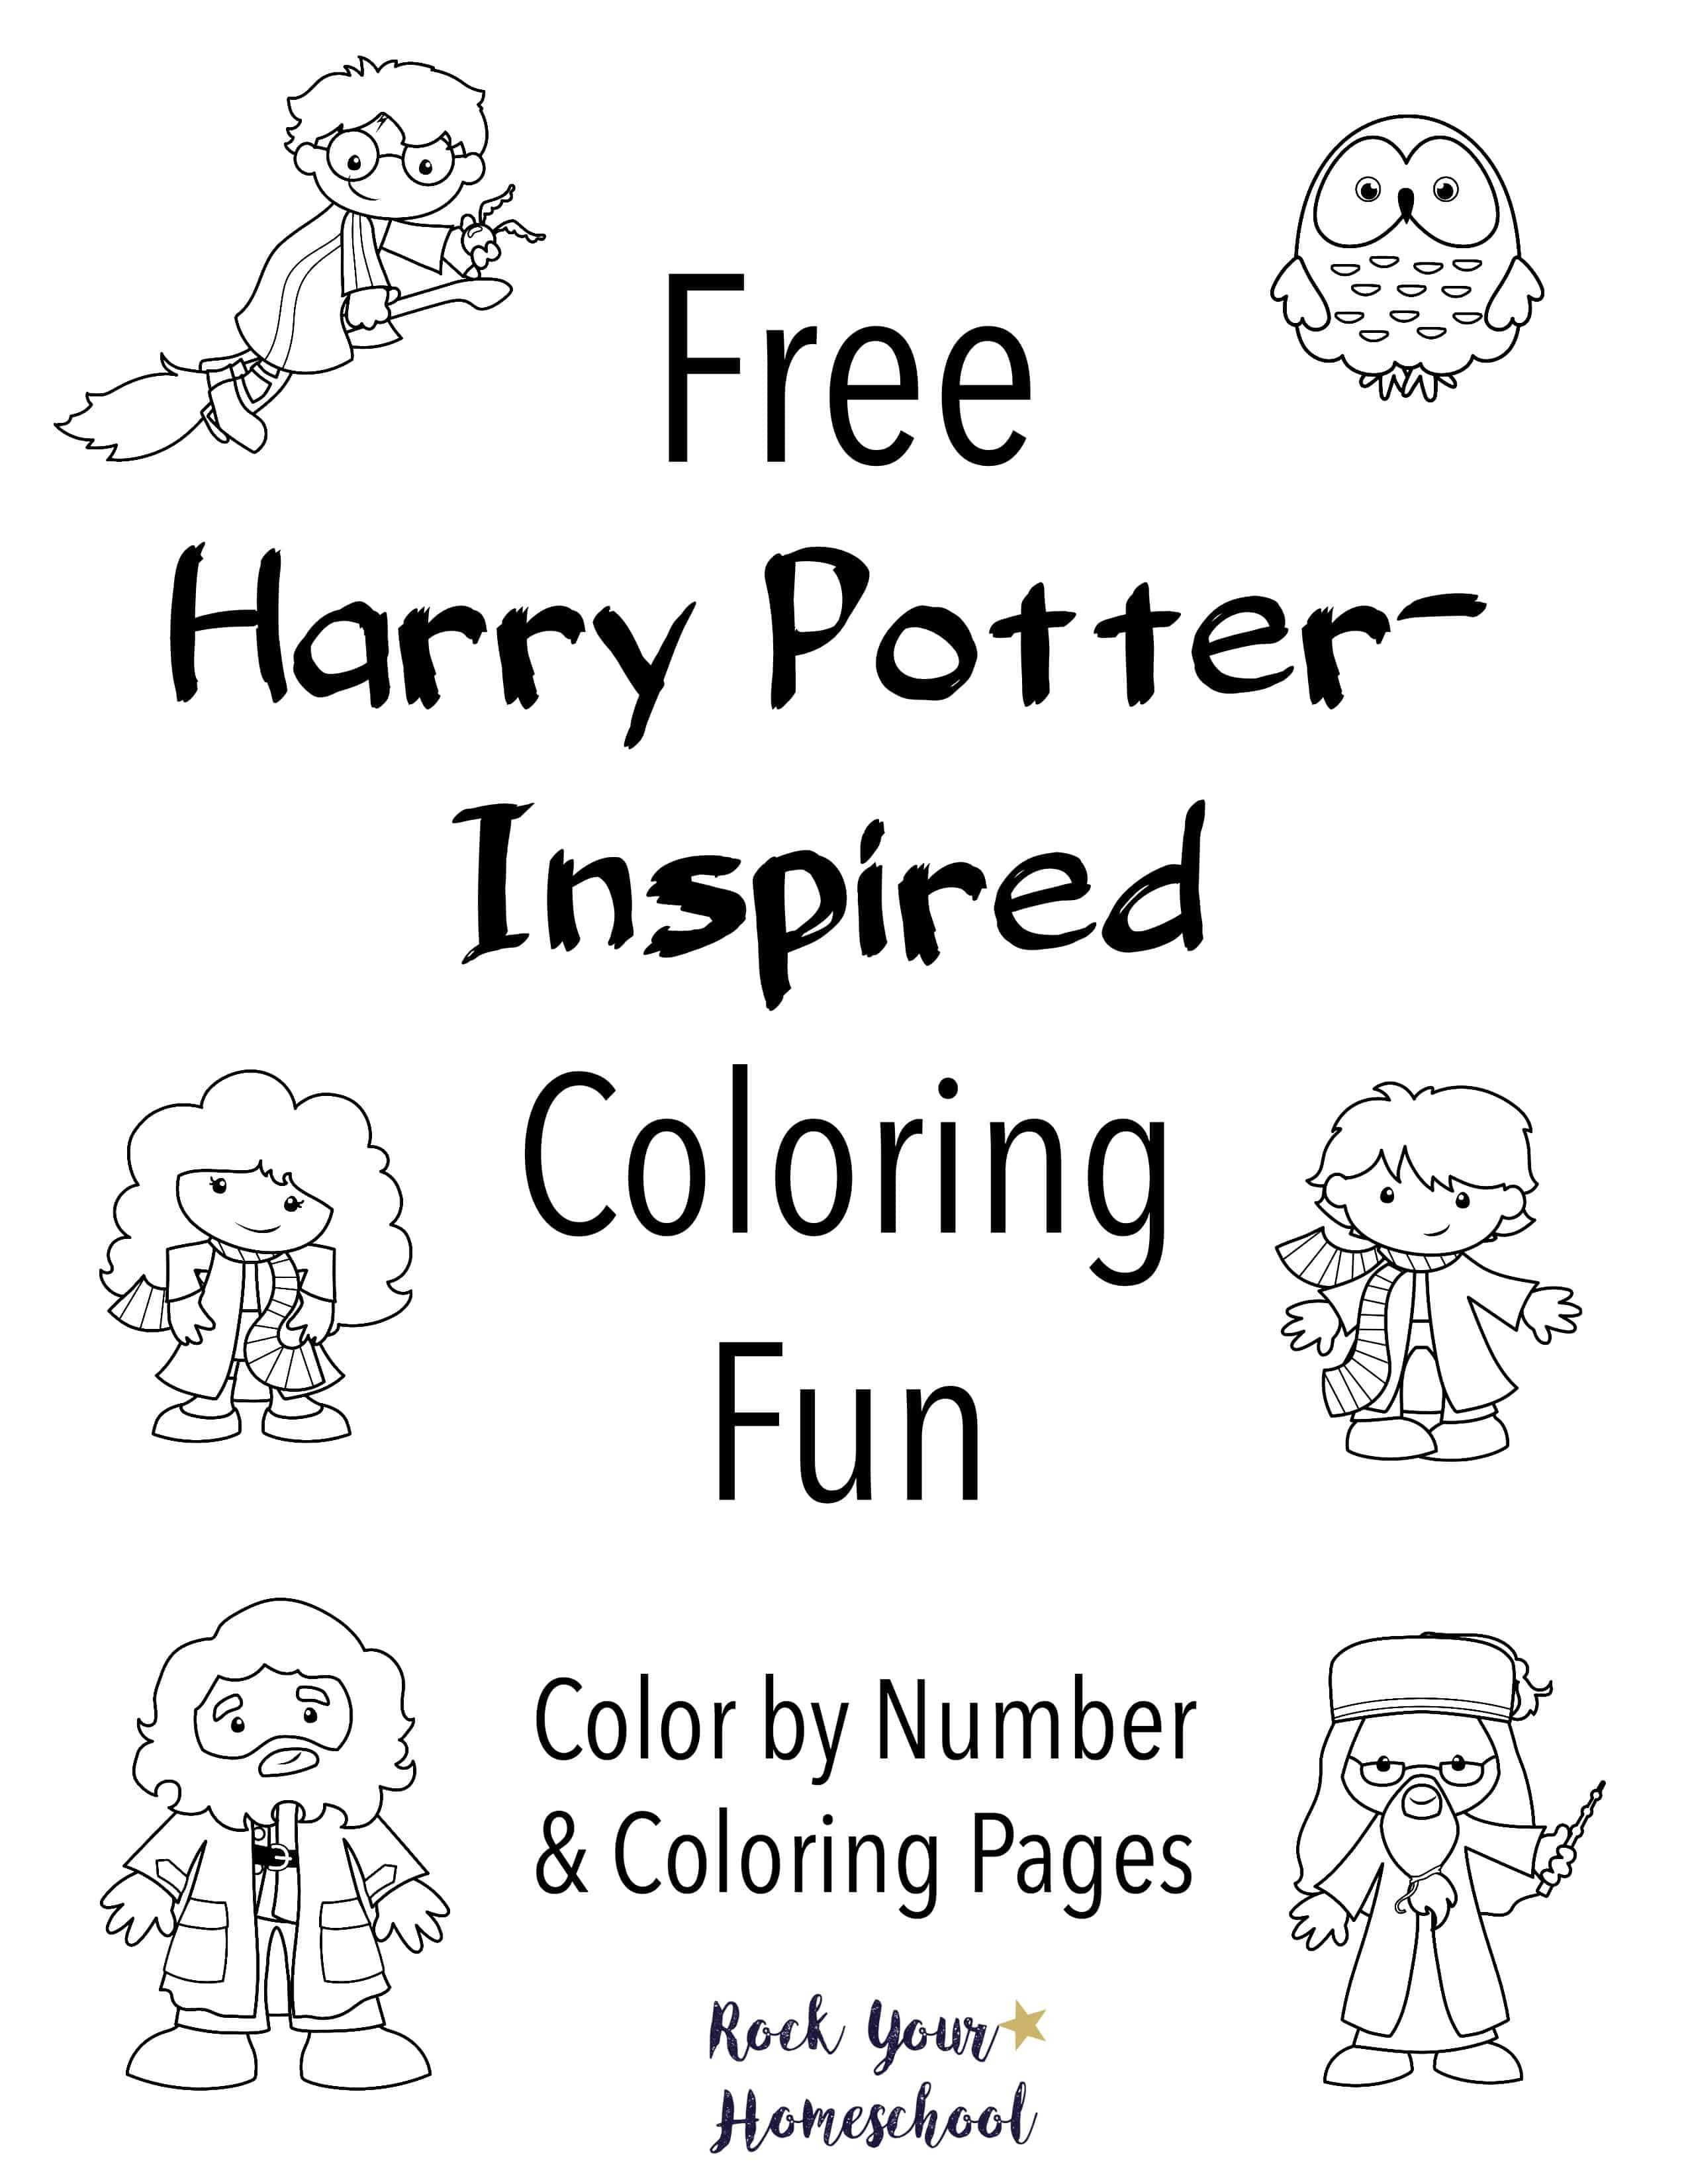 Rock Coloring Page Free Harry Potter Inspired Coloring Fun Rock Your Homeschool